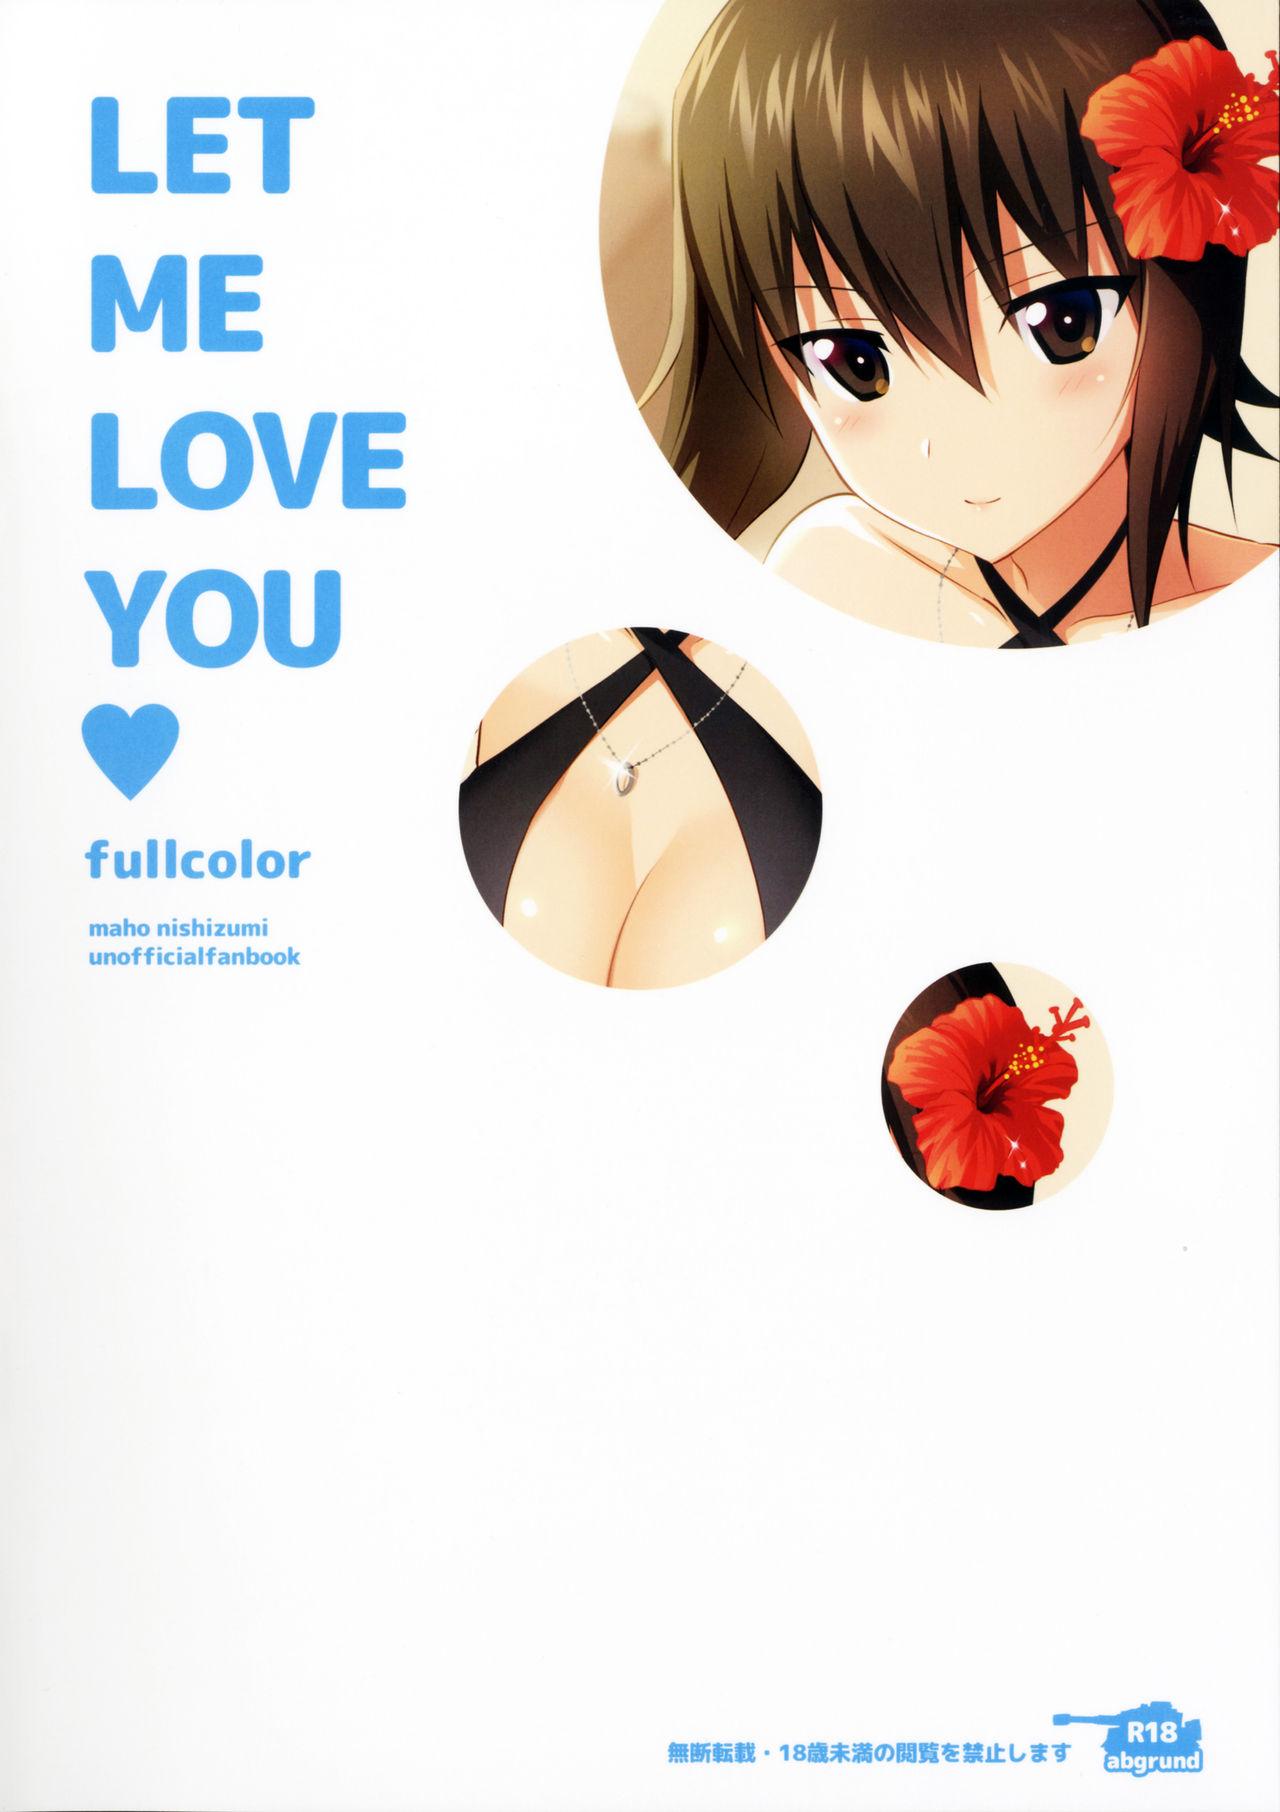 Room LET ME LOVE YOU fullcolor - Girls und panzer Straight Porn - Page 19